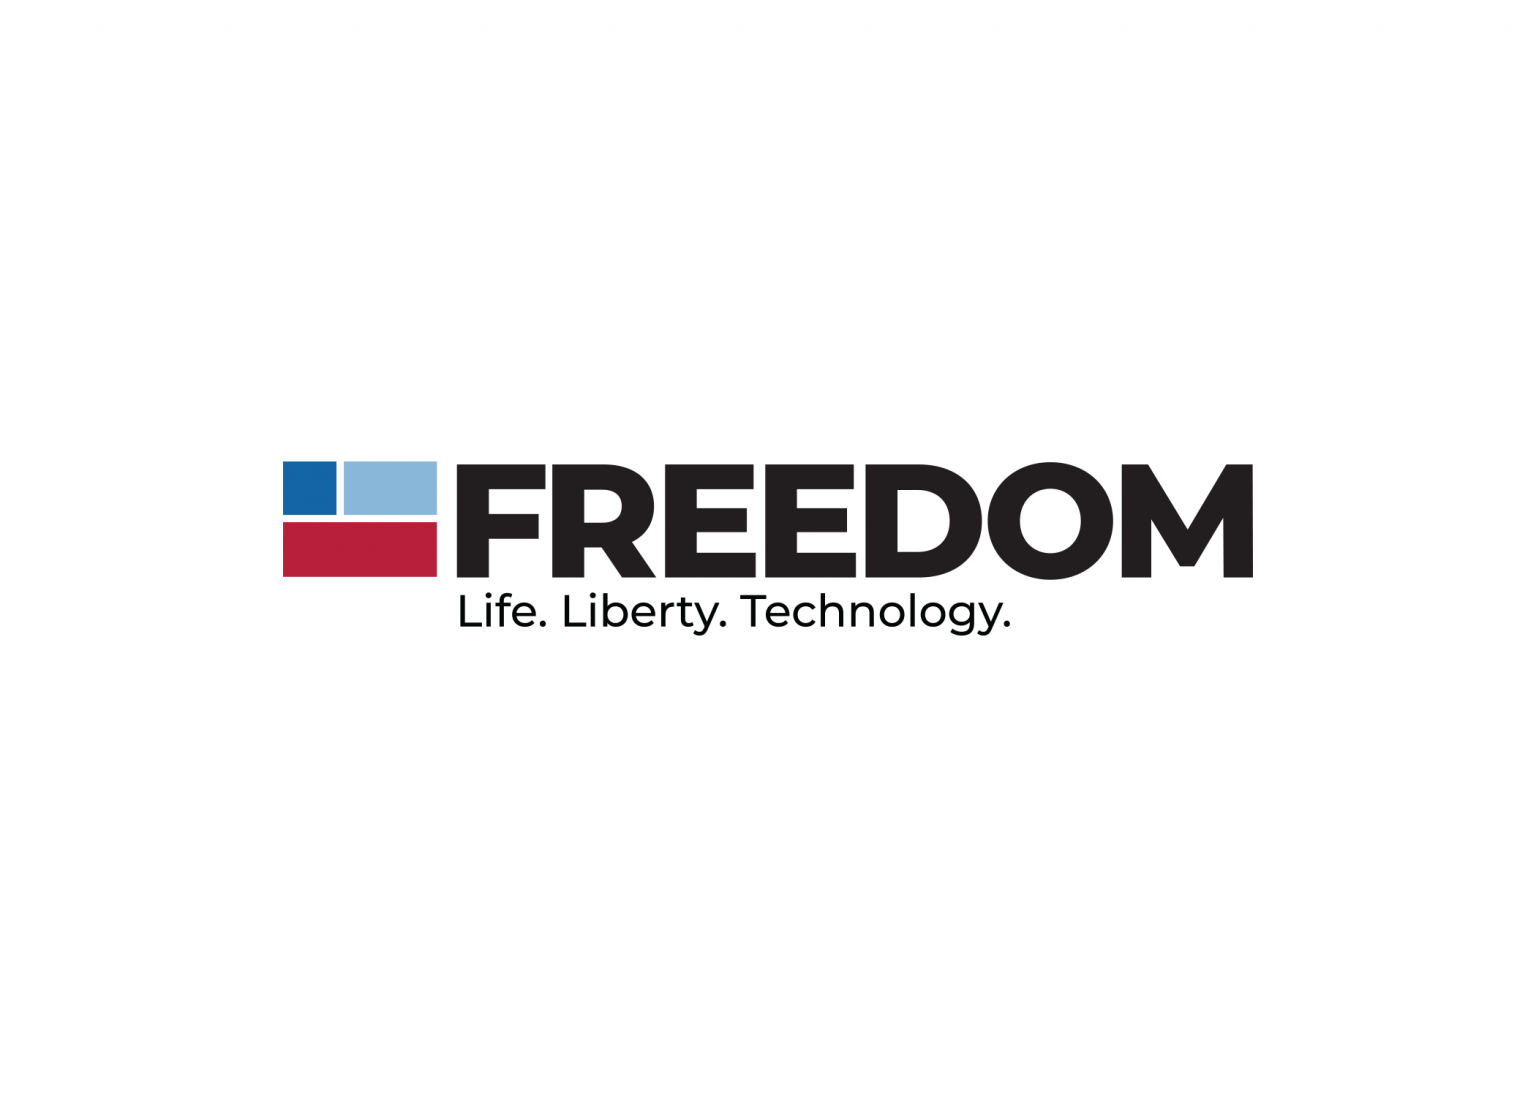 Vernon Saunders CEO Freedom Consulting Group; Freedom Consulting Group services